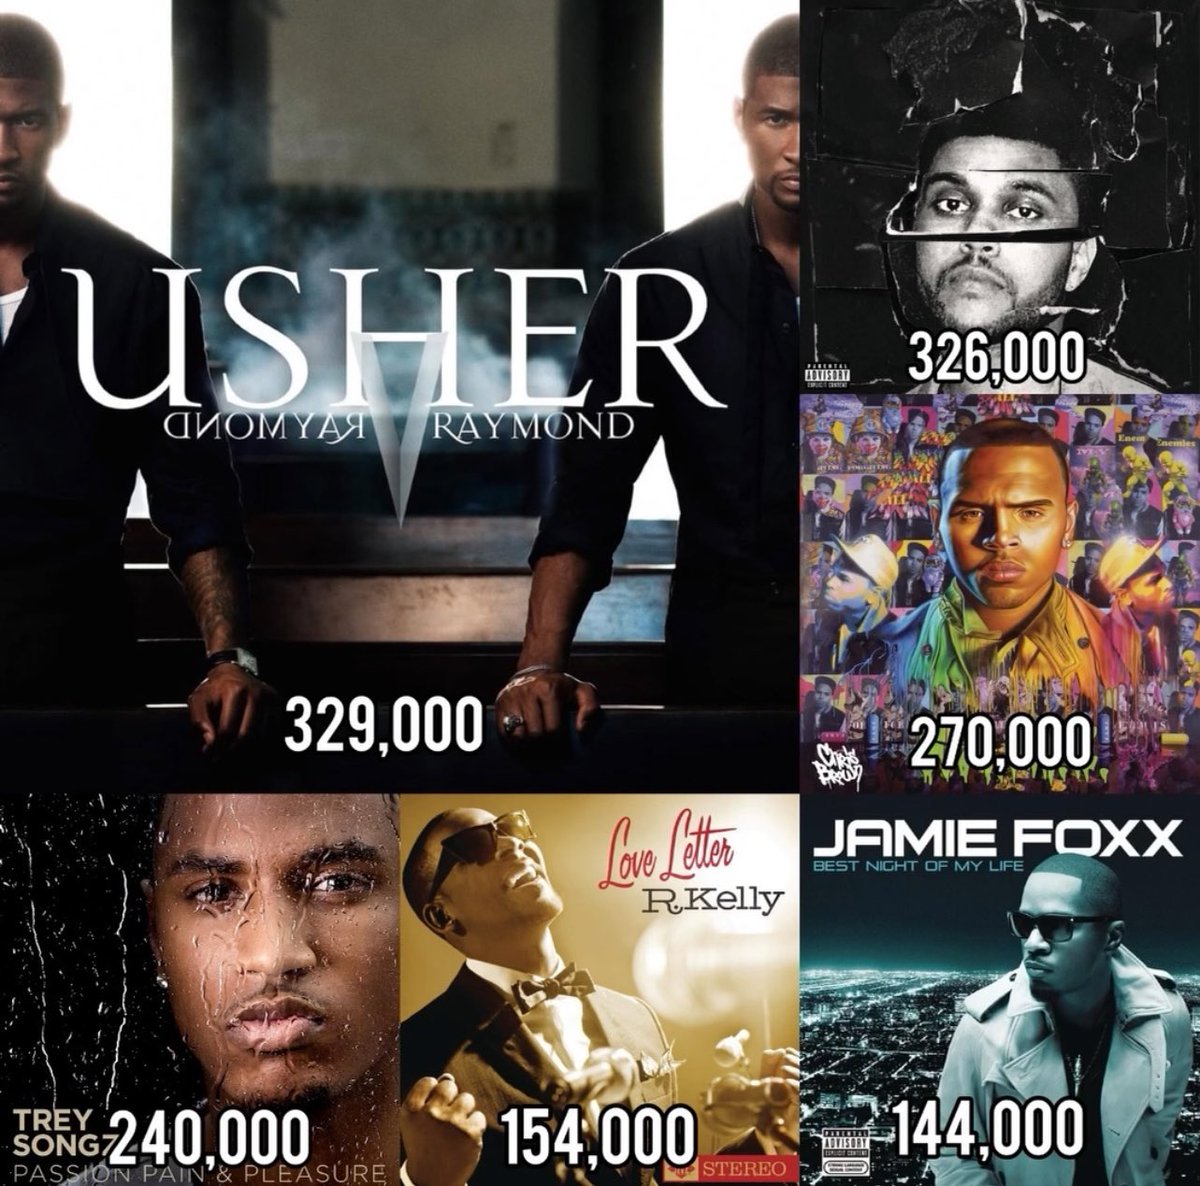 Highest first week sales for a black male R&B artist in the 2010s decade: